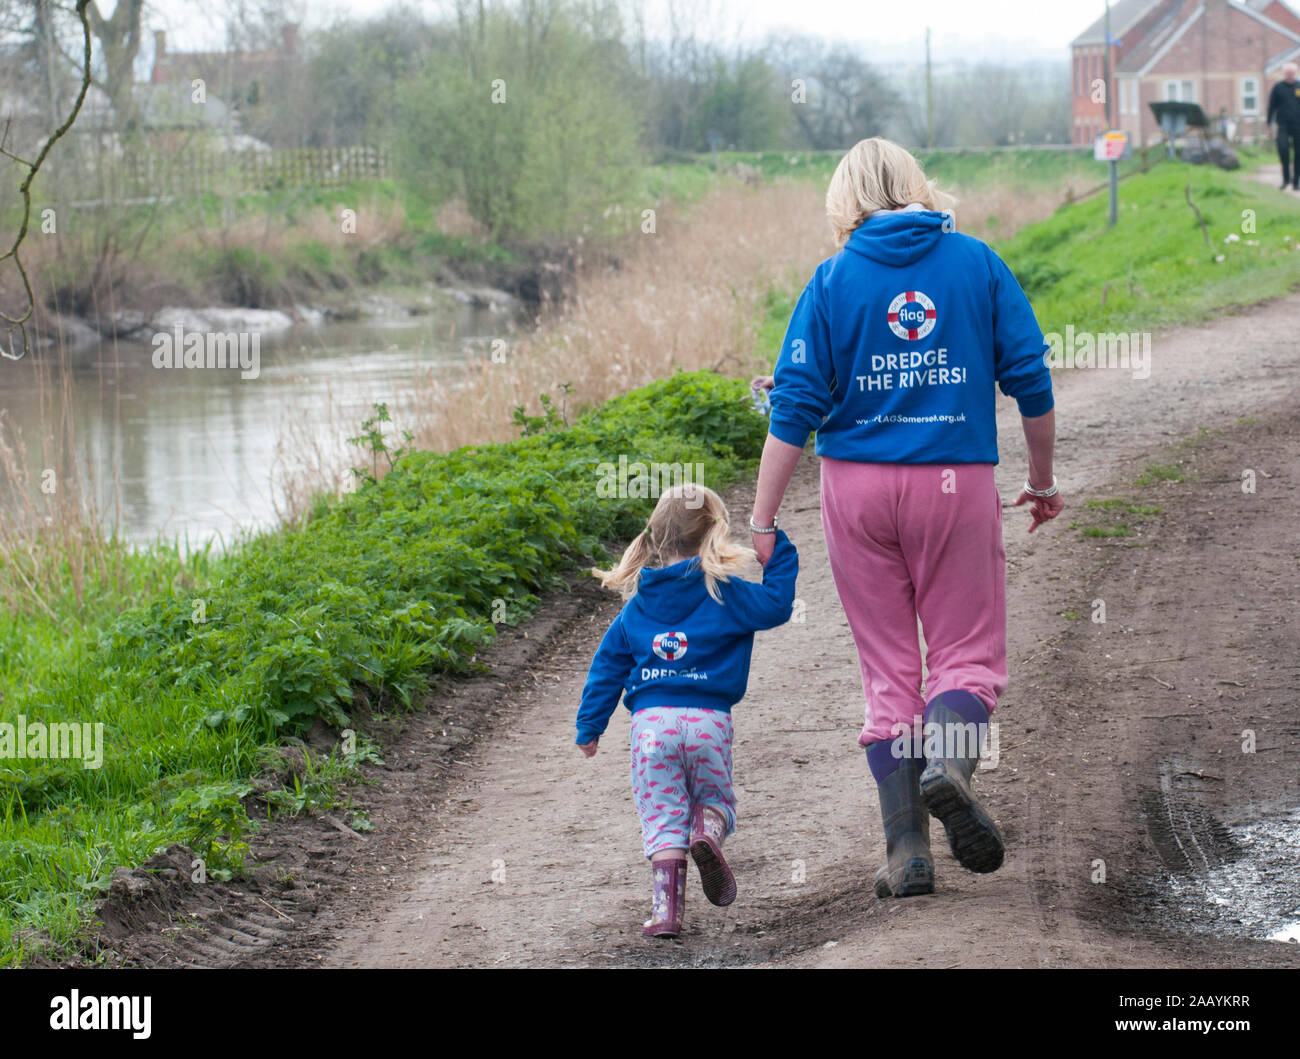 Dredging begins on the local river to prevent further flooding at Moreland in Somerset. Victims of the recent flooding Bryony Sadler and her three year old Elsa are hoping that the dredging of the the river will prevent future flooding. March 2014 Stock Photo